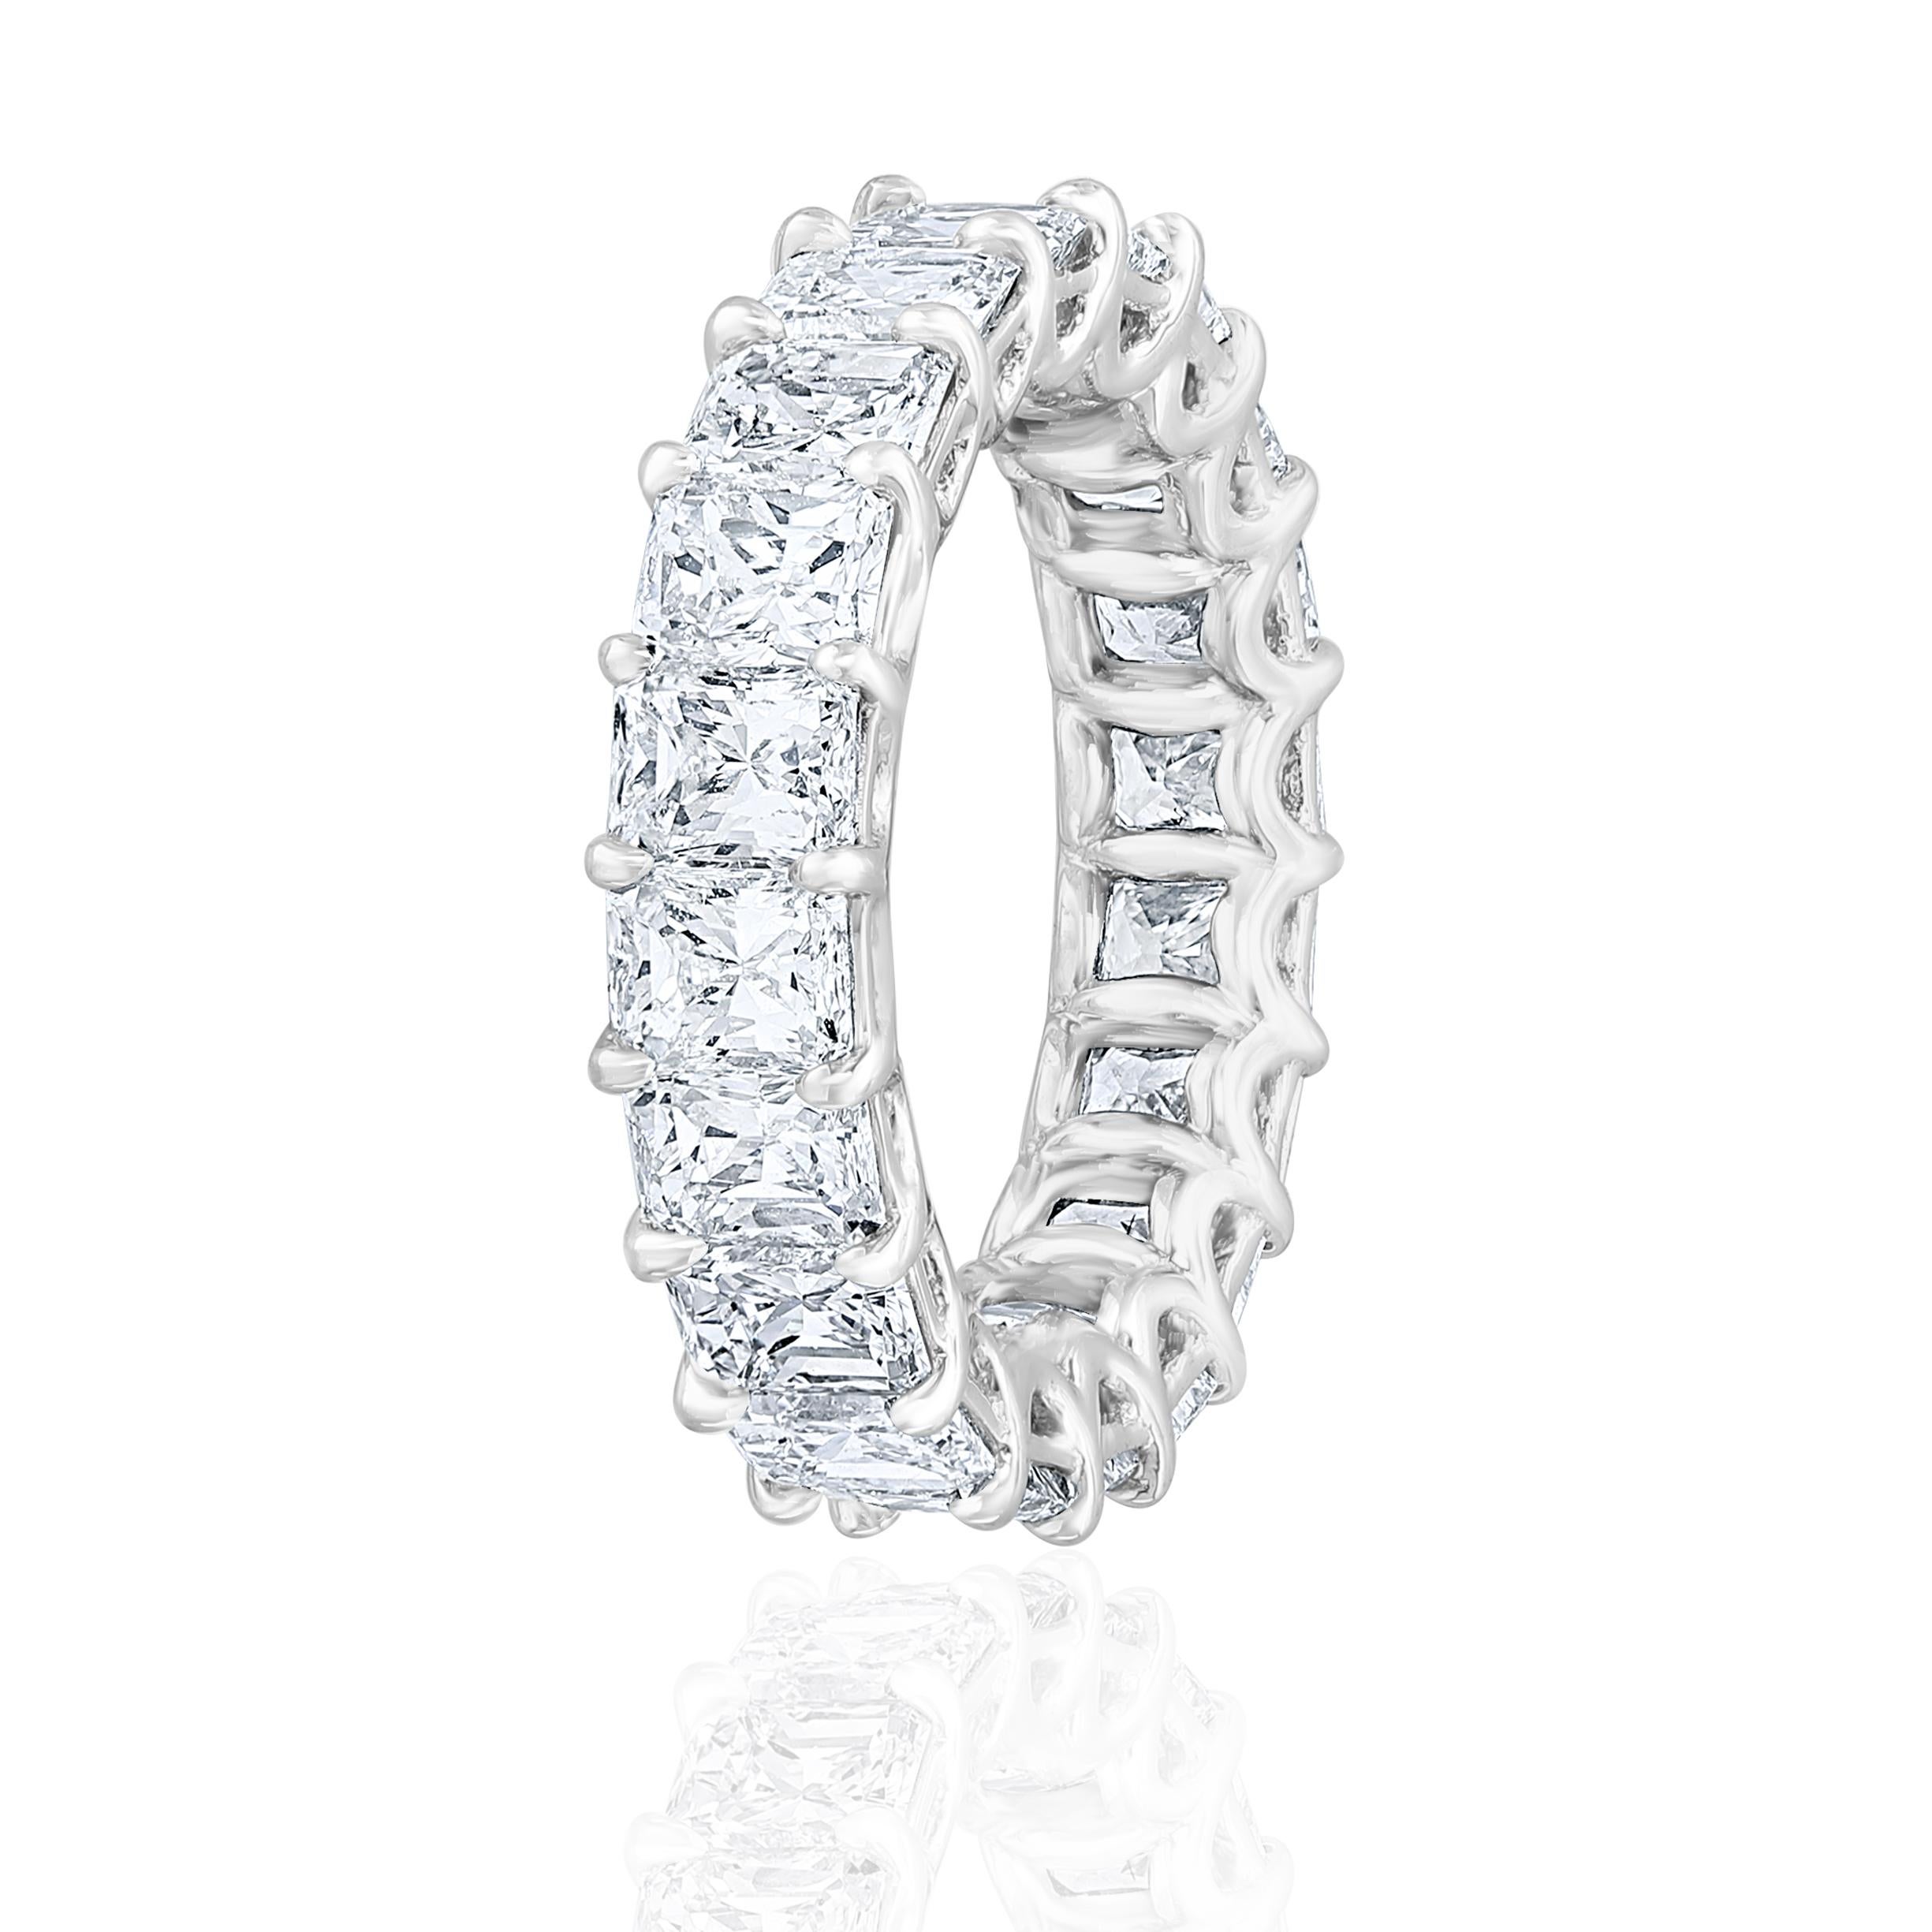 20 perfectly matched Radiant Cut Diamonds weighing 6.13 Carats set in Platinum.

Each stones weighs over 30pts.

Size 6.